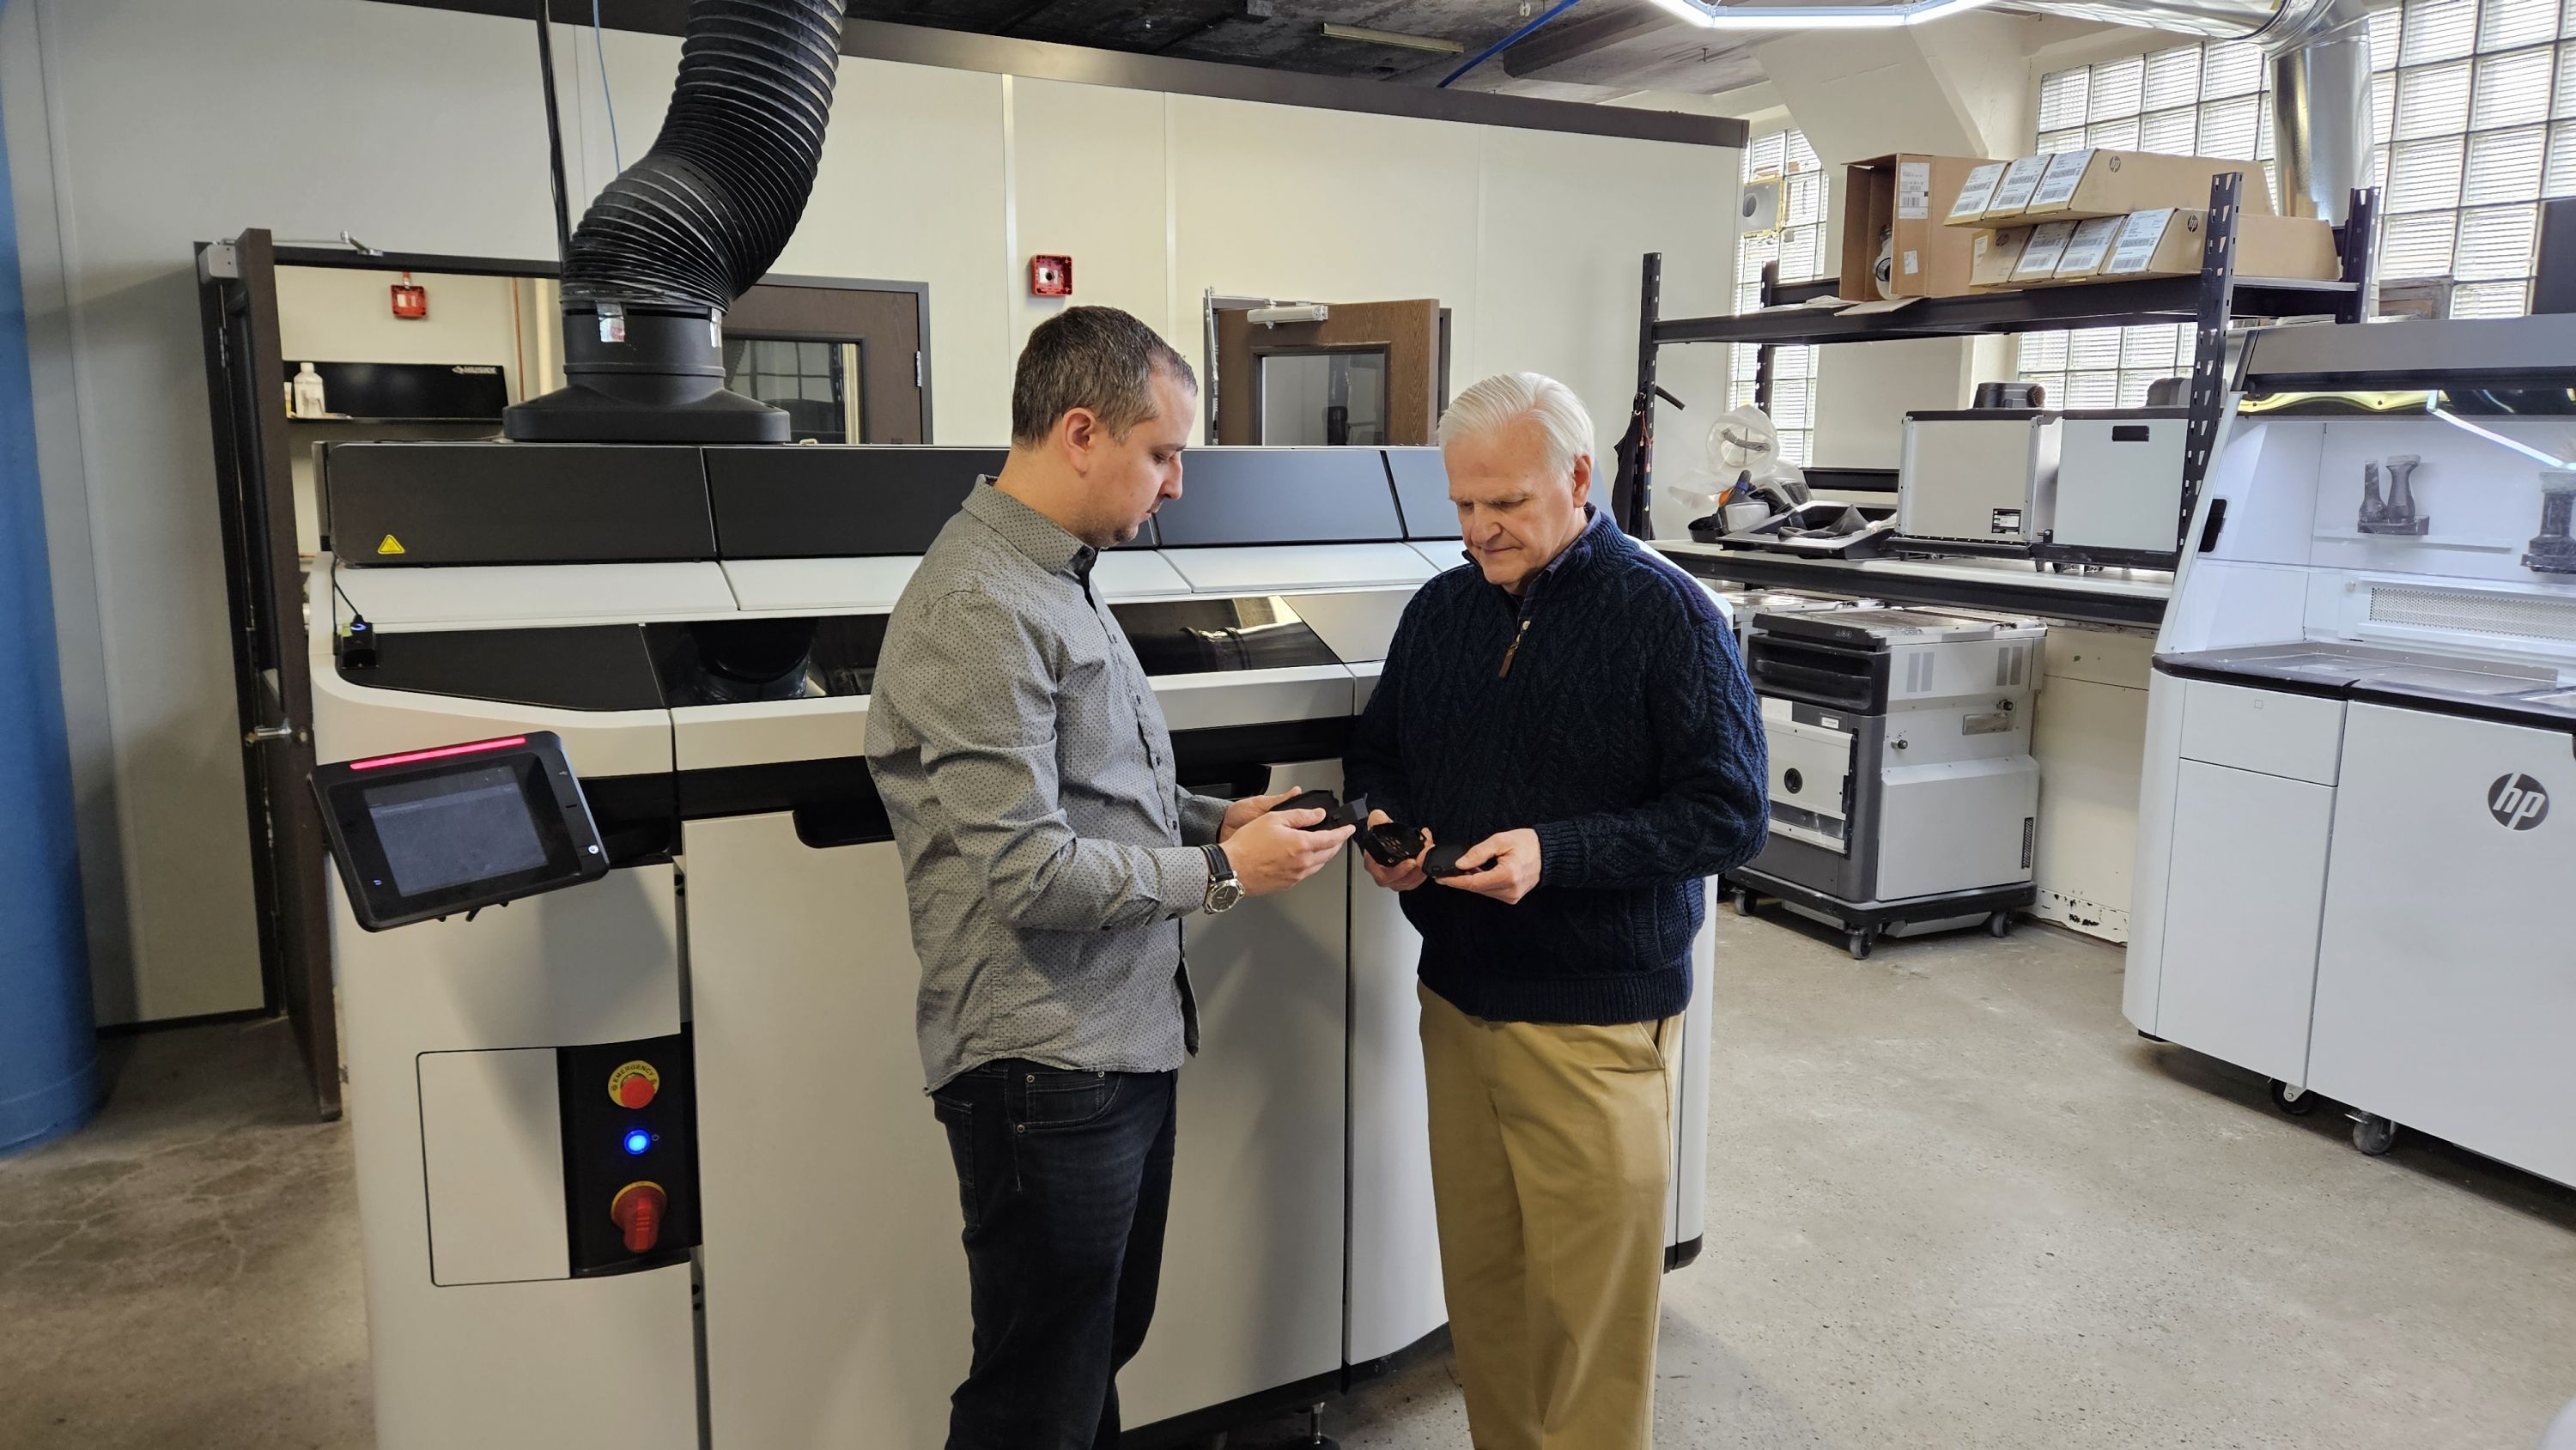 Mike Vindler of Tronix3D and Elry Cramer of Buchanan Sales evaluate printing parts that are designed to convert to injection molding when volume warrants it.